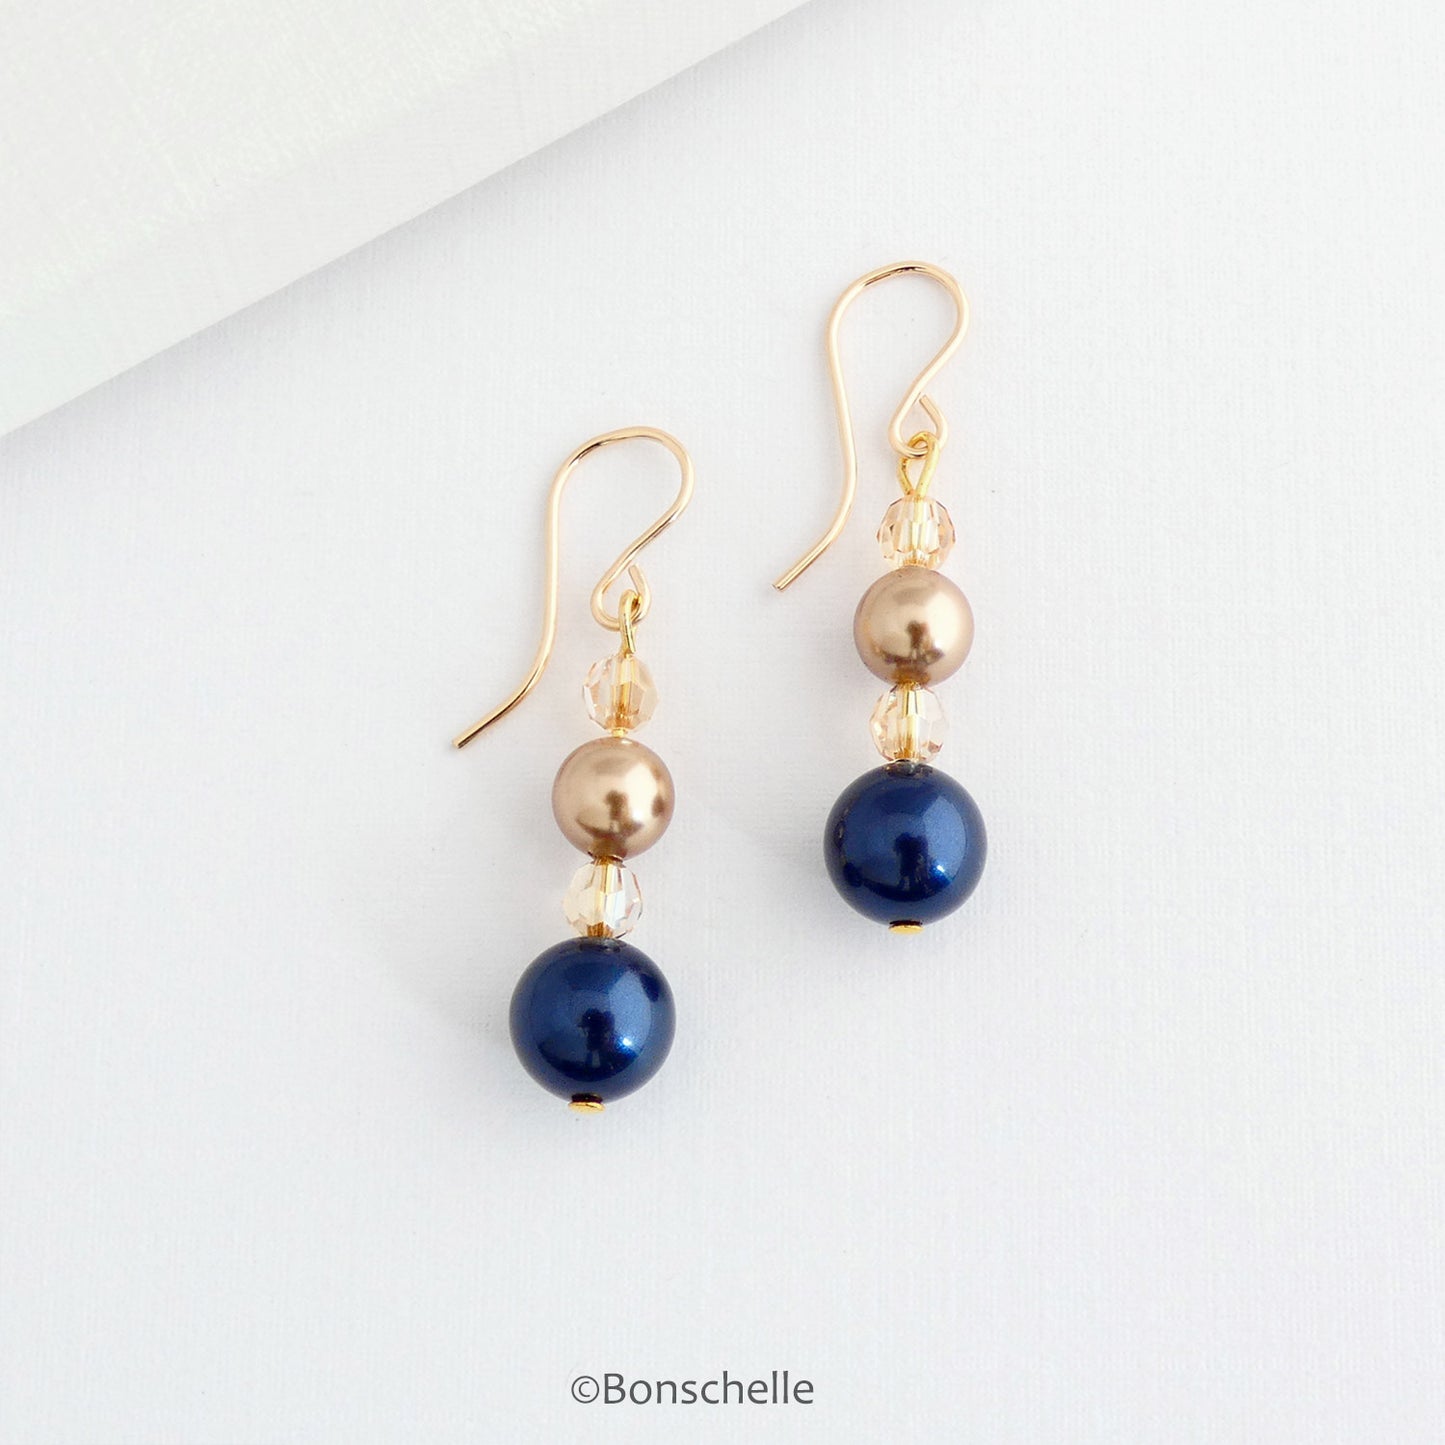 Blue and bronze pearl drop earrings with 14K gold fill earwires